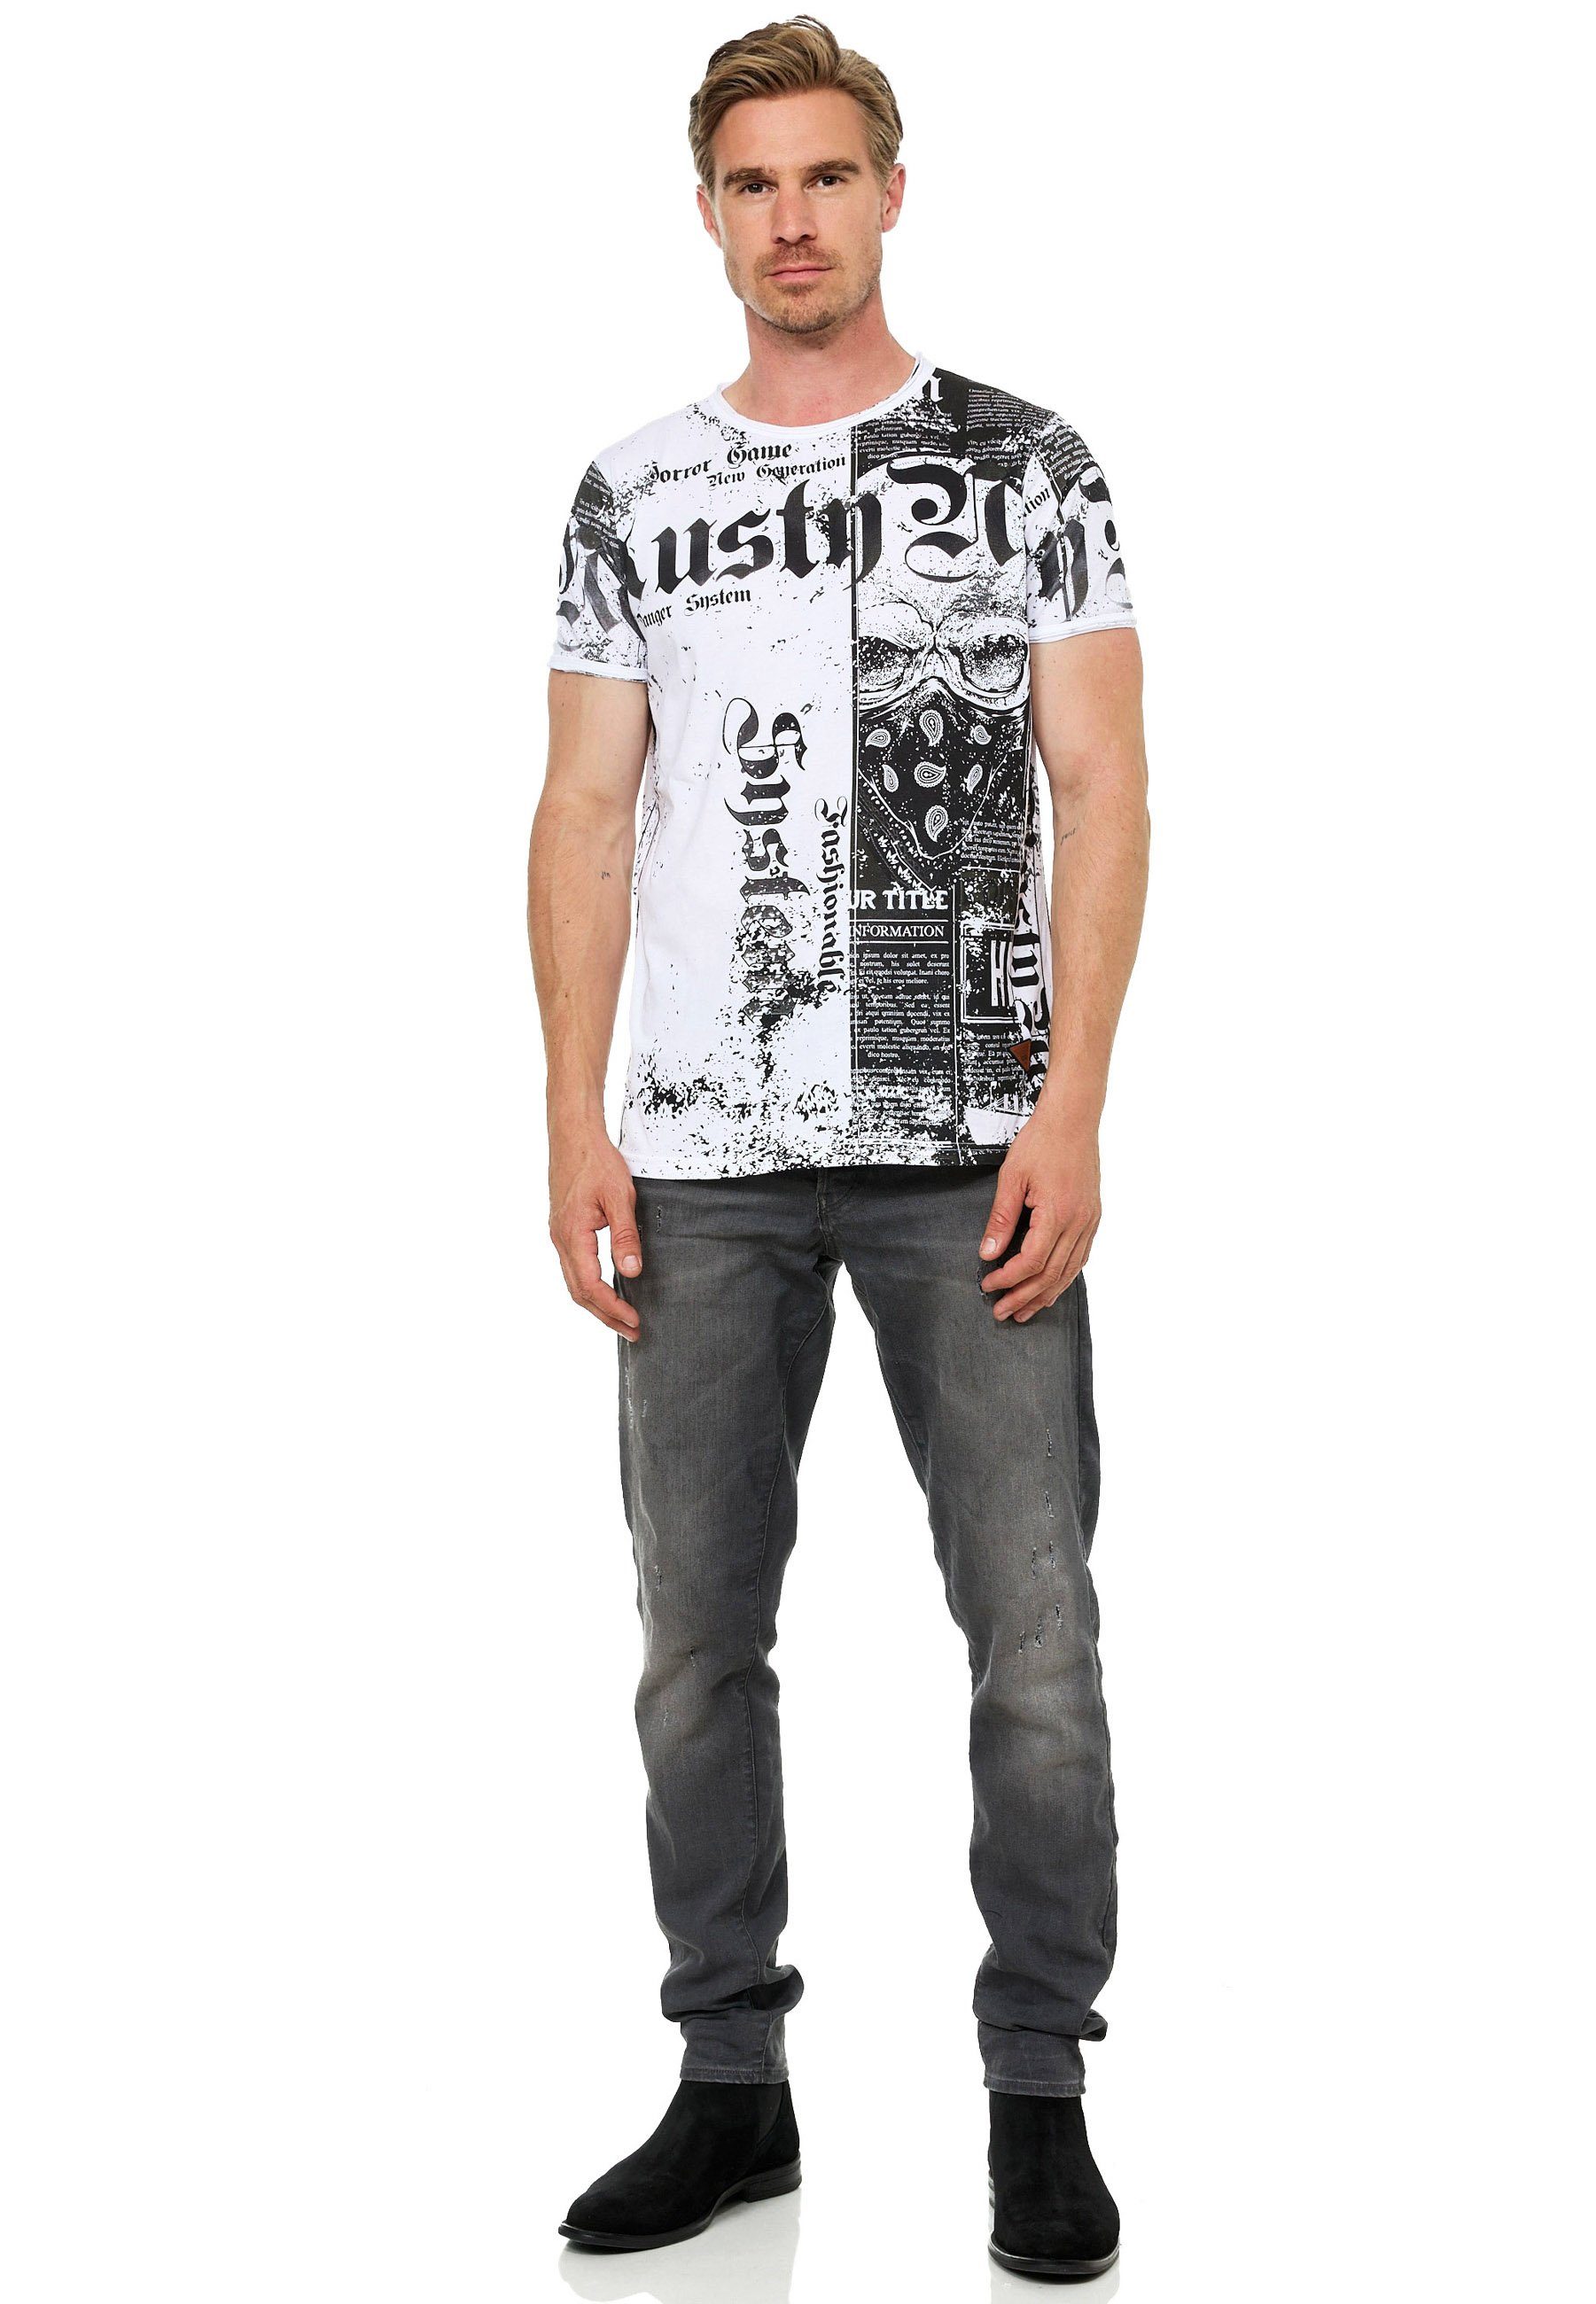 Rusty Neal T-Shirt mit Allover-Print anthrazit Used-Look im